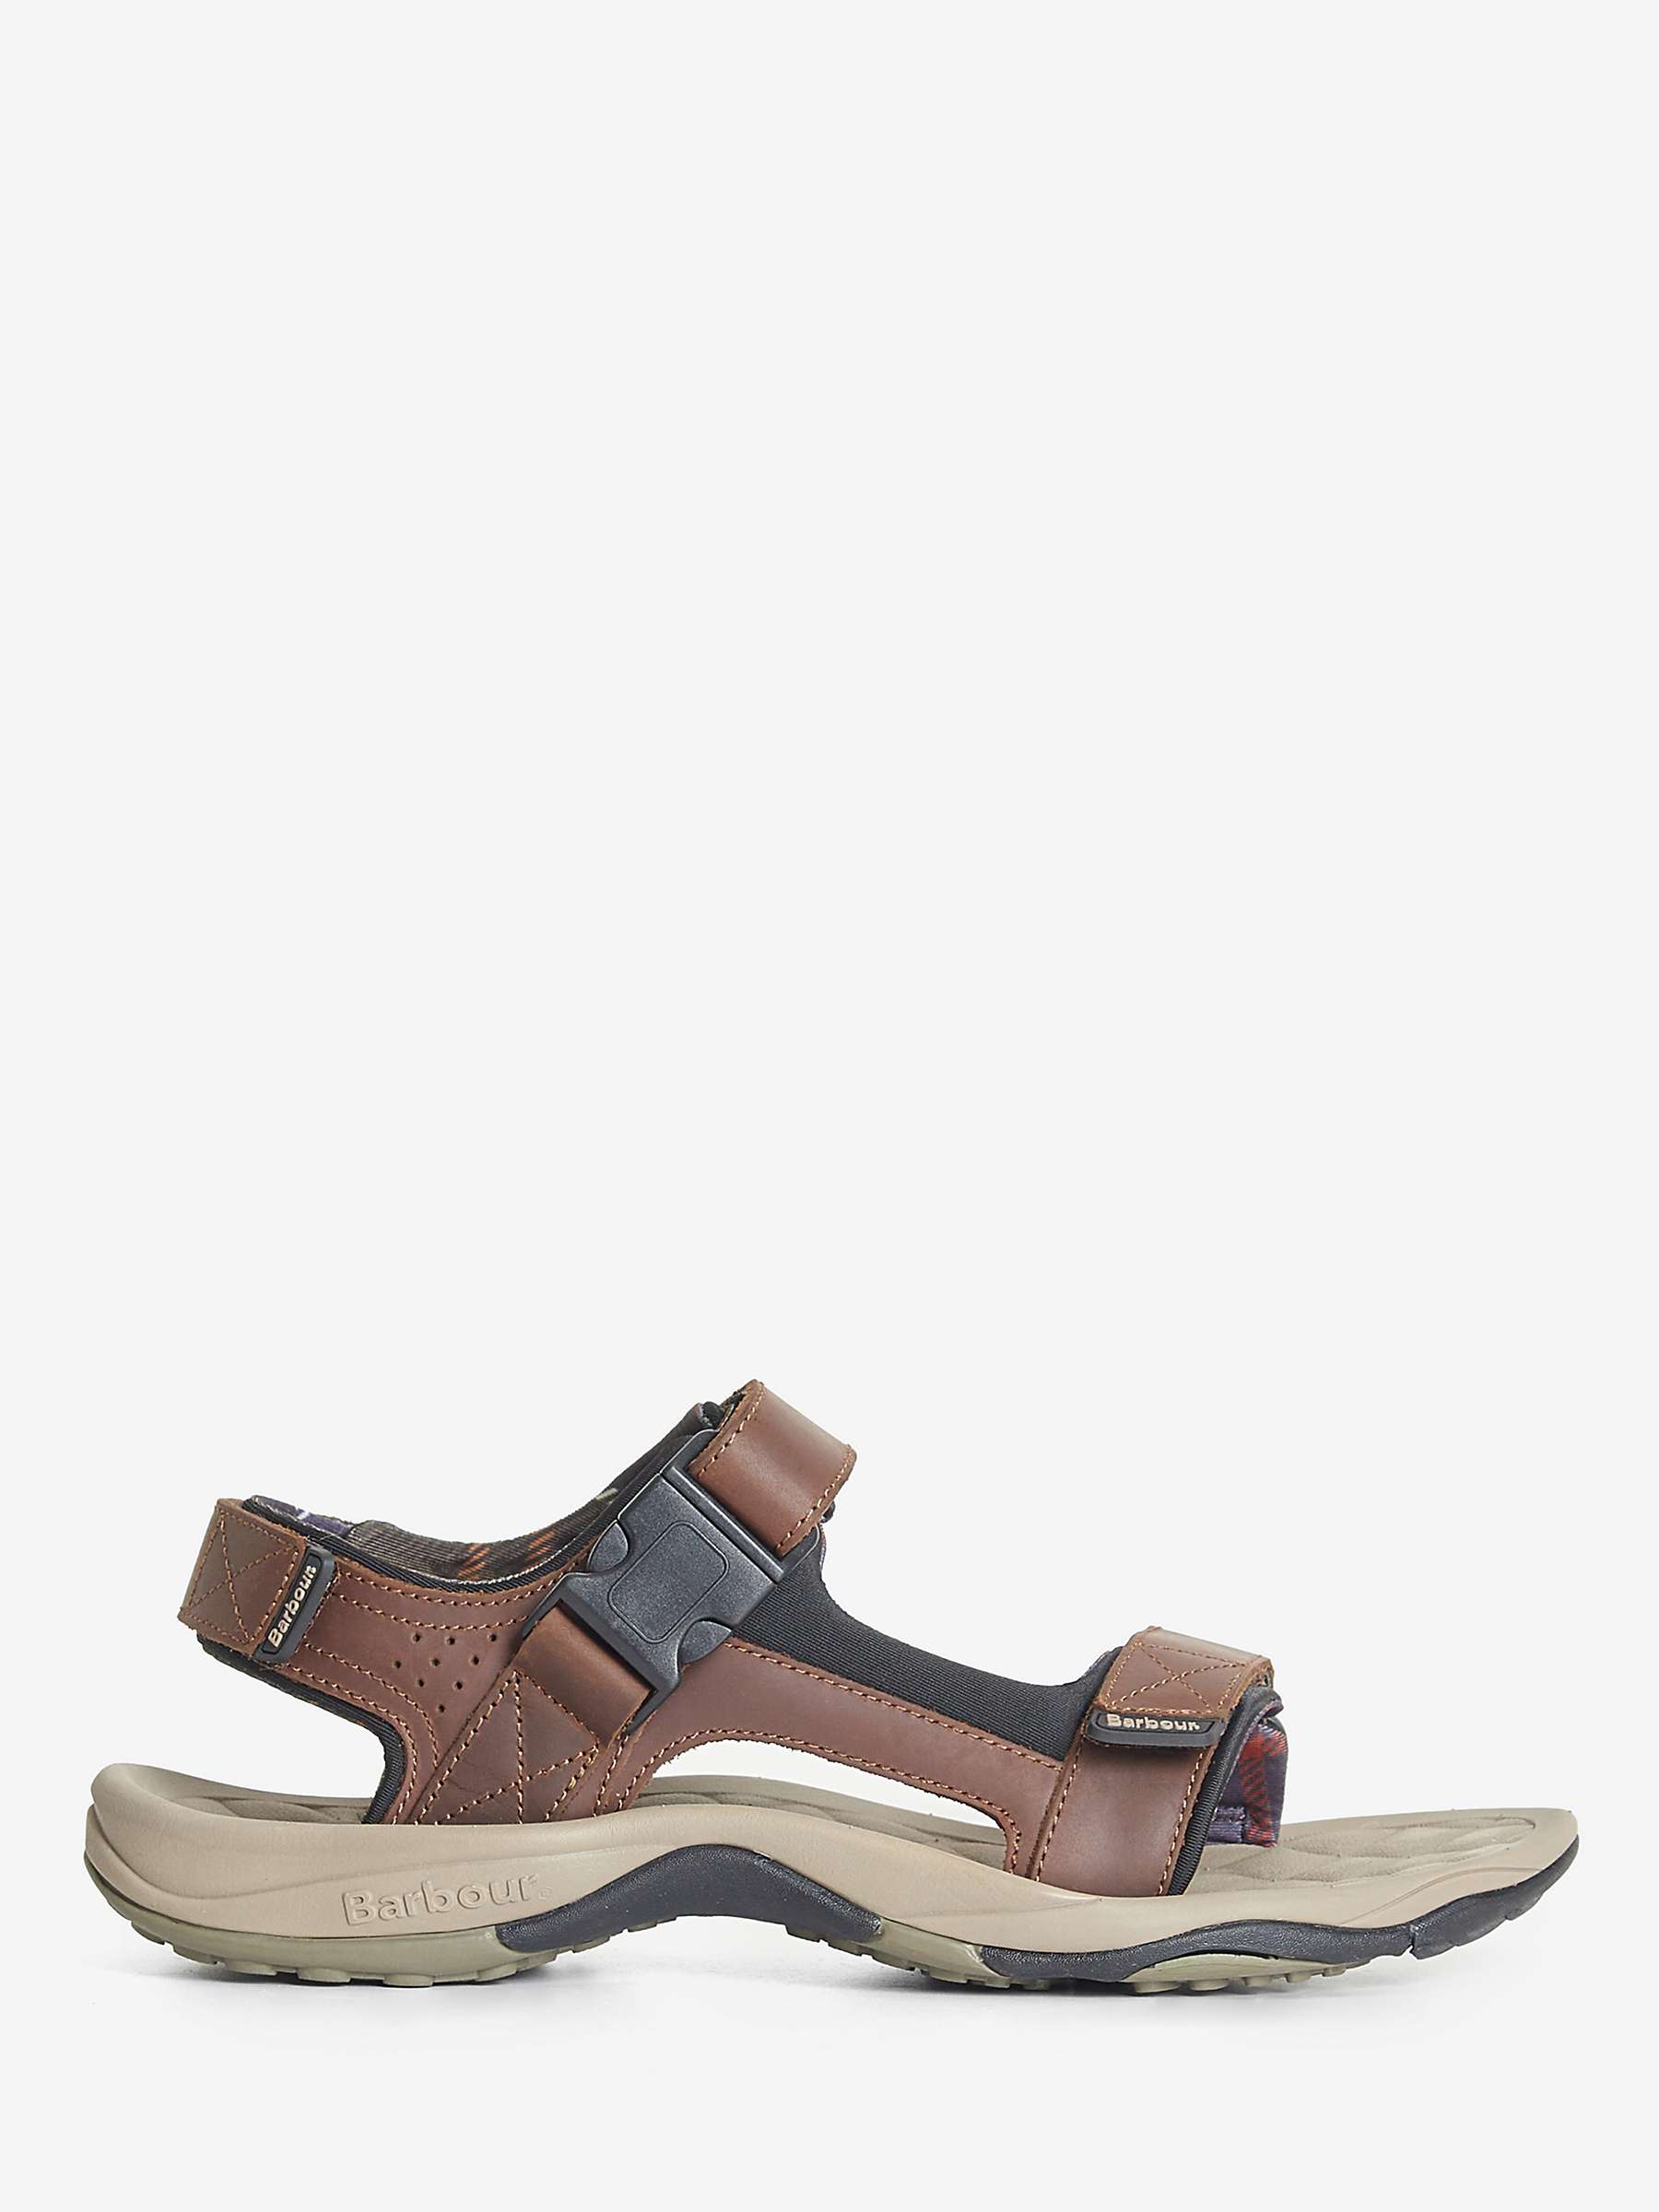 Buy Barbour Pawston Sandals, Brown Online at johnlewis.com